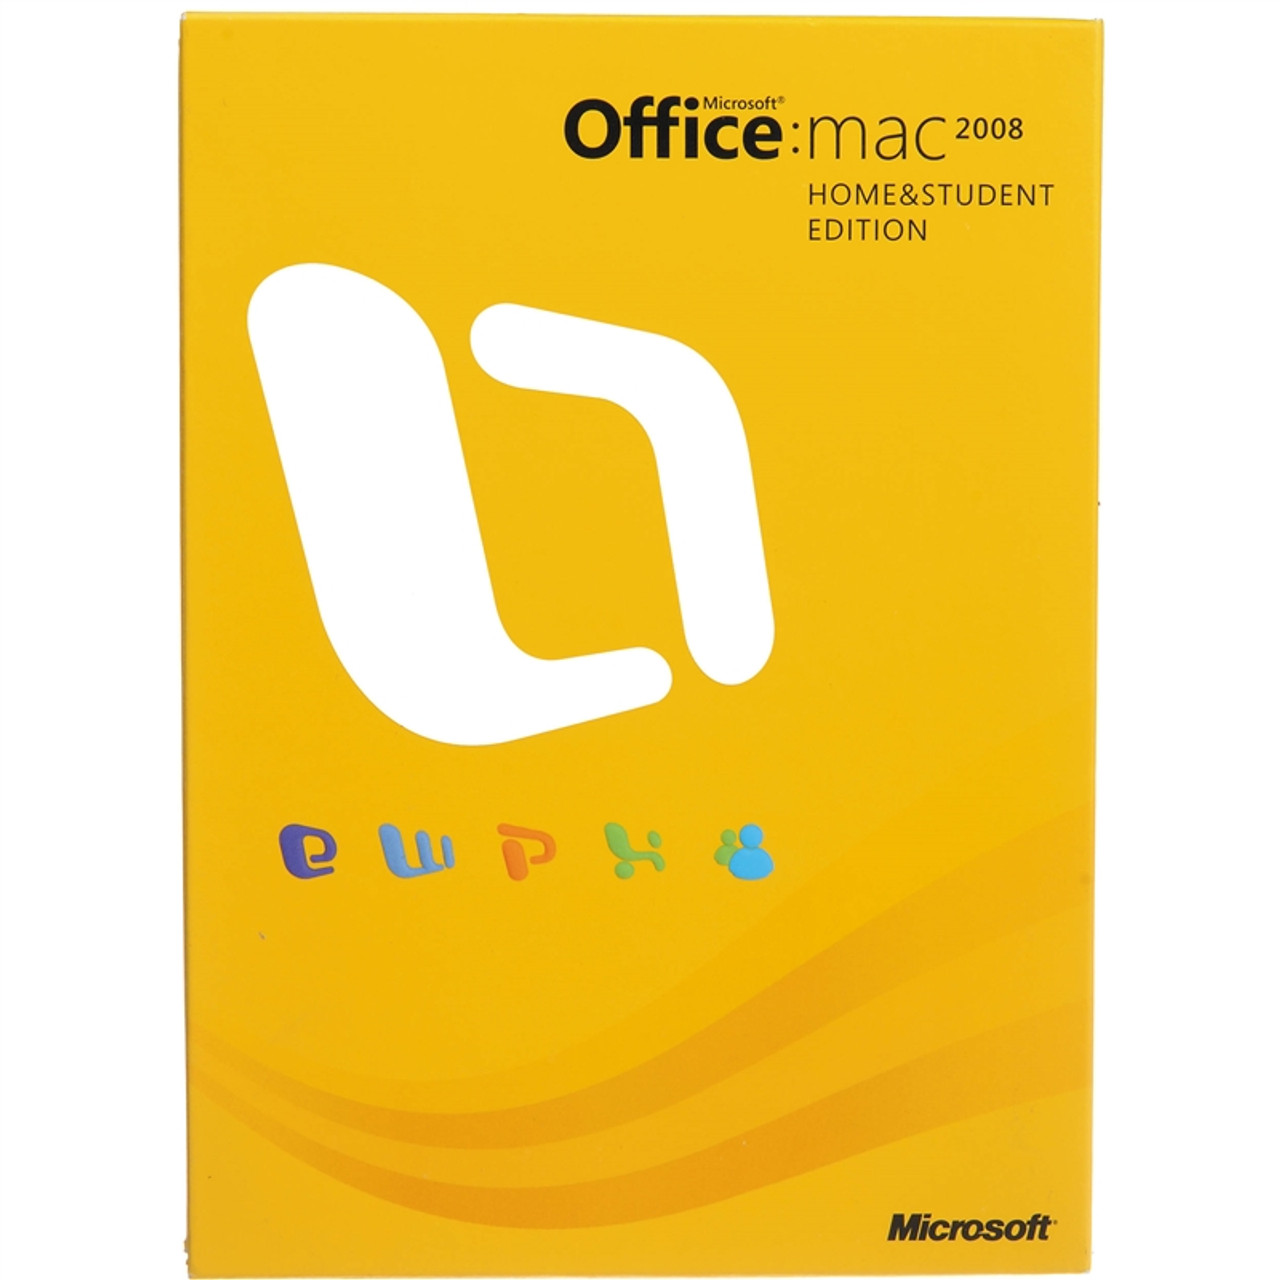 Microsoft Office 2008 for Mac Home & Student Edition - Good Condition